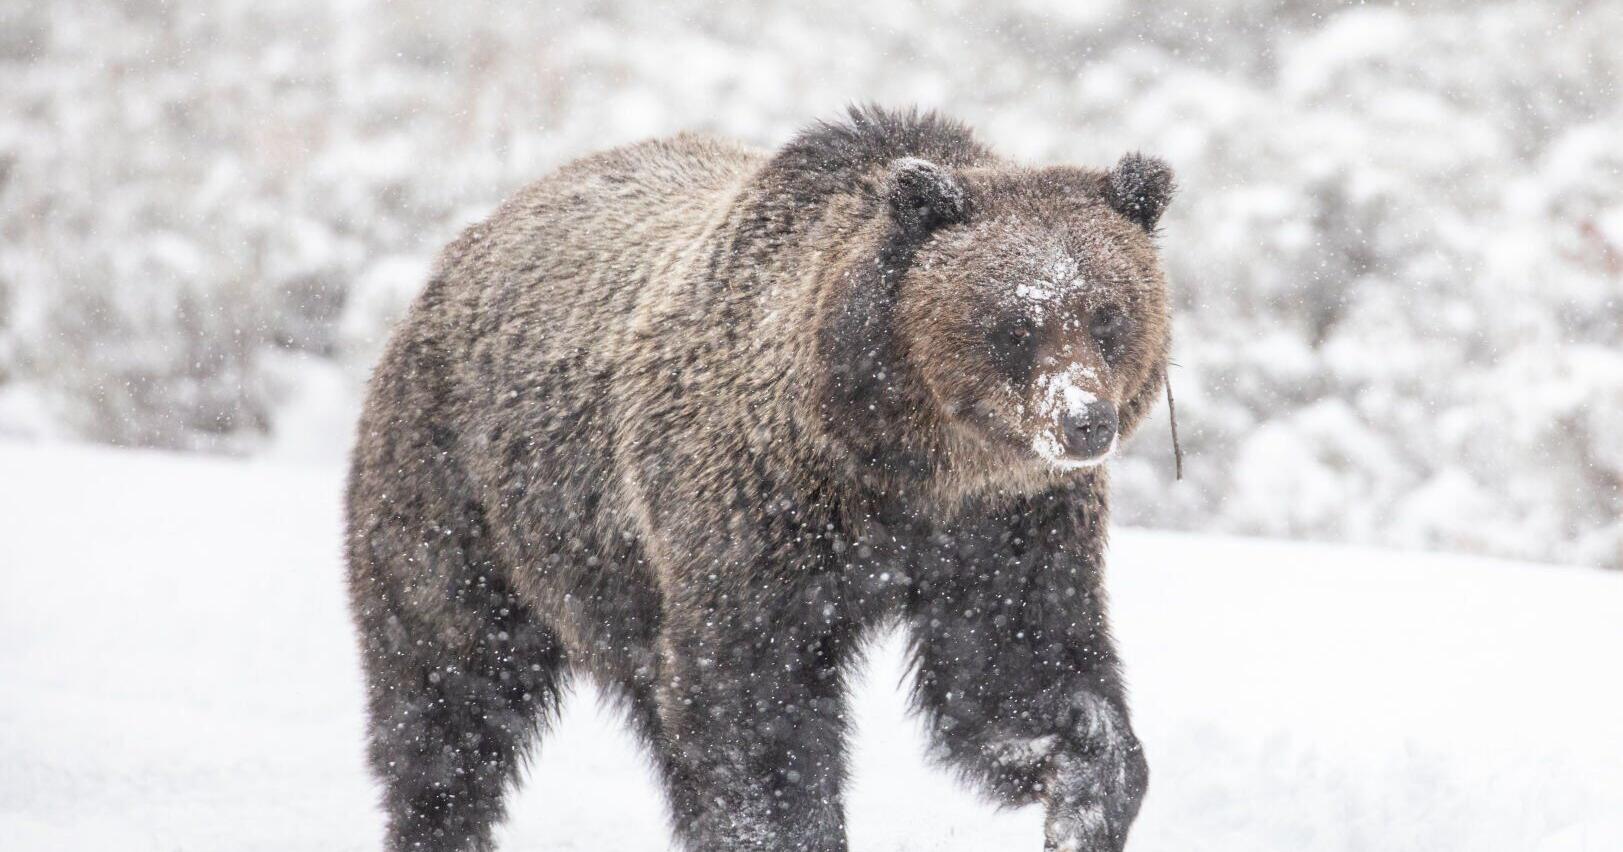 Grizzly bear euthanized after killing cattle in Teton County